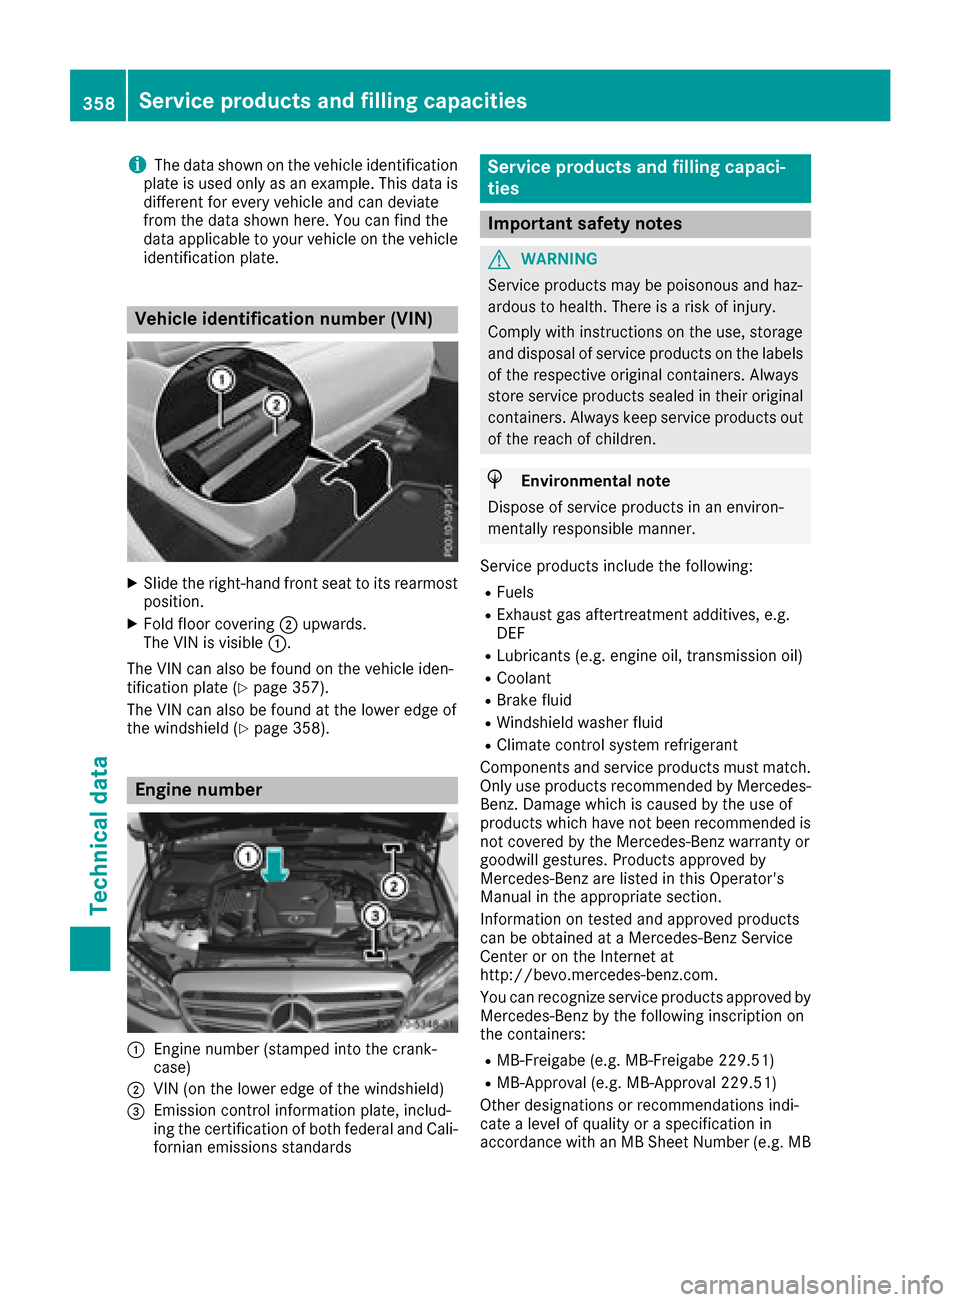 MERCEDES-BENZ GLC COUPE 2017 X253 Owners Manual iThe data shown on the vehicle identification
plate is used only as an example. This data is
different for every vehicle and can deviate
from the data shown here. You can find the
data applicable to y